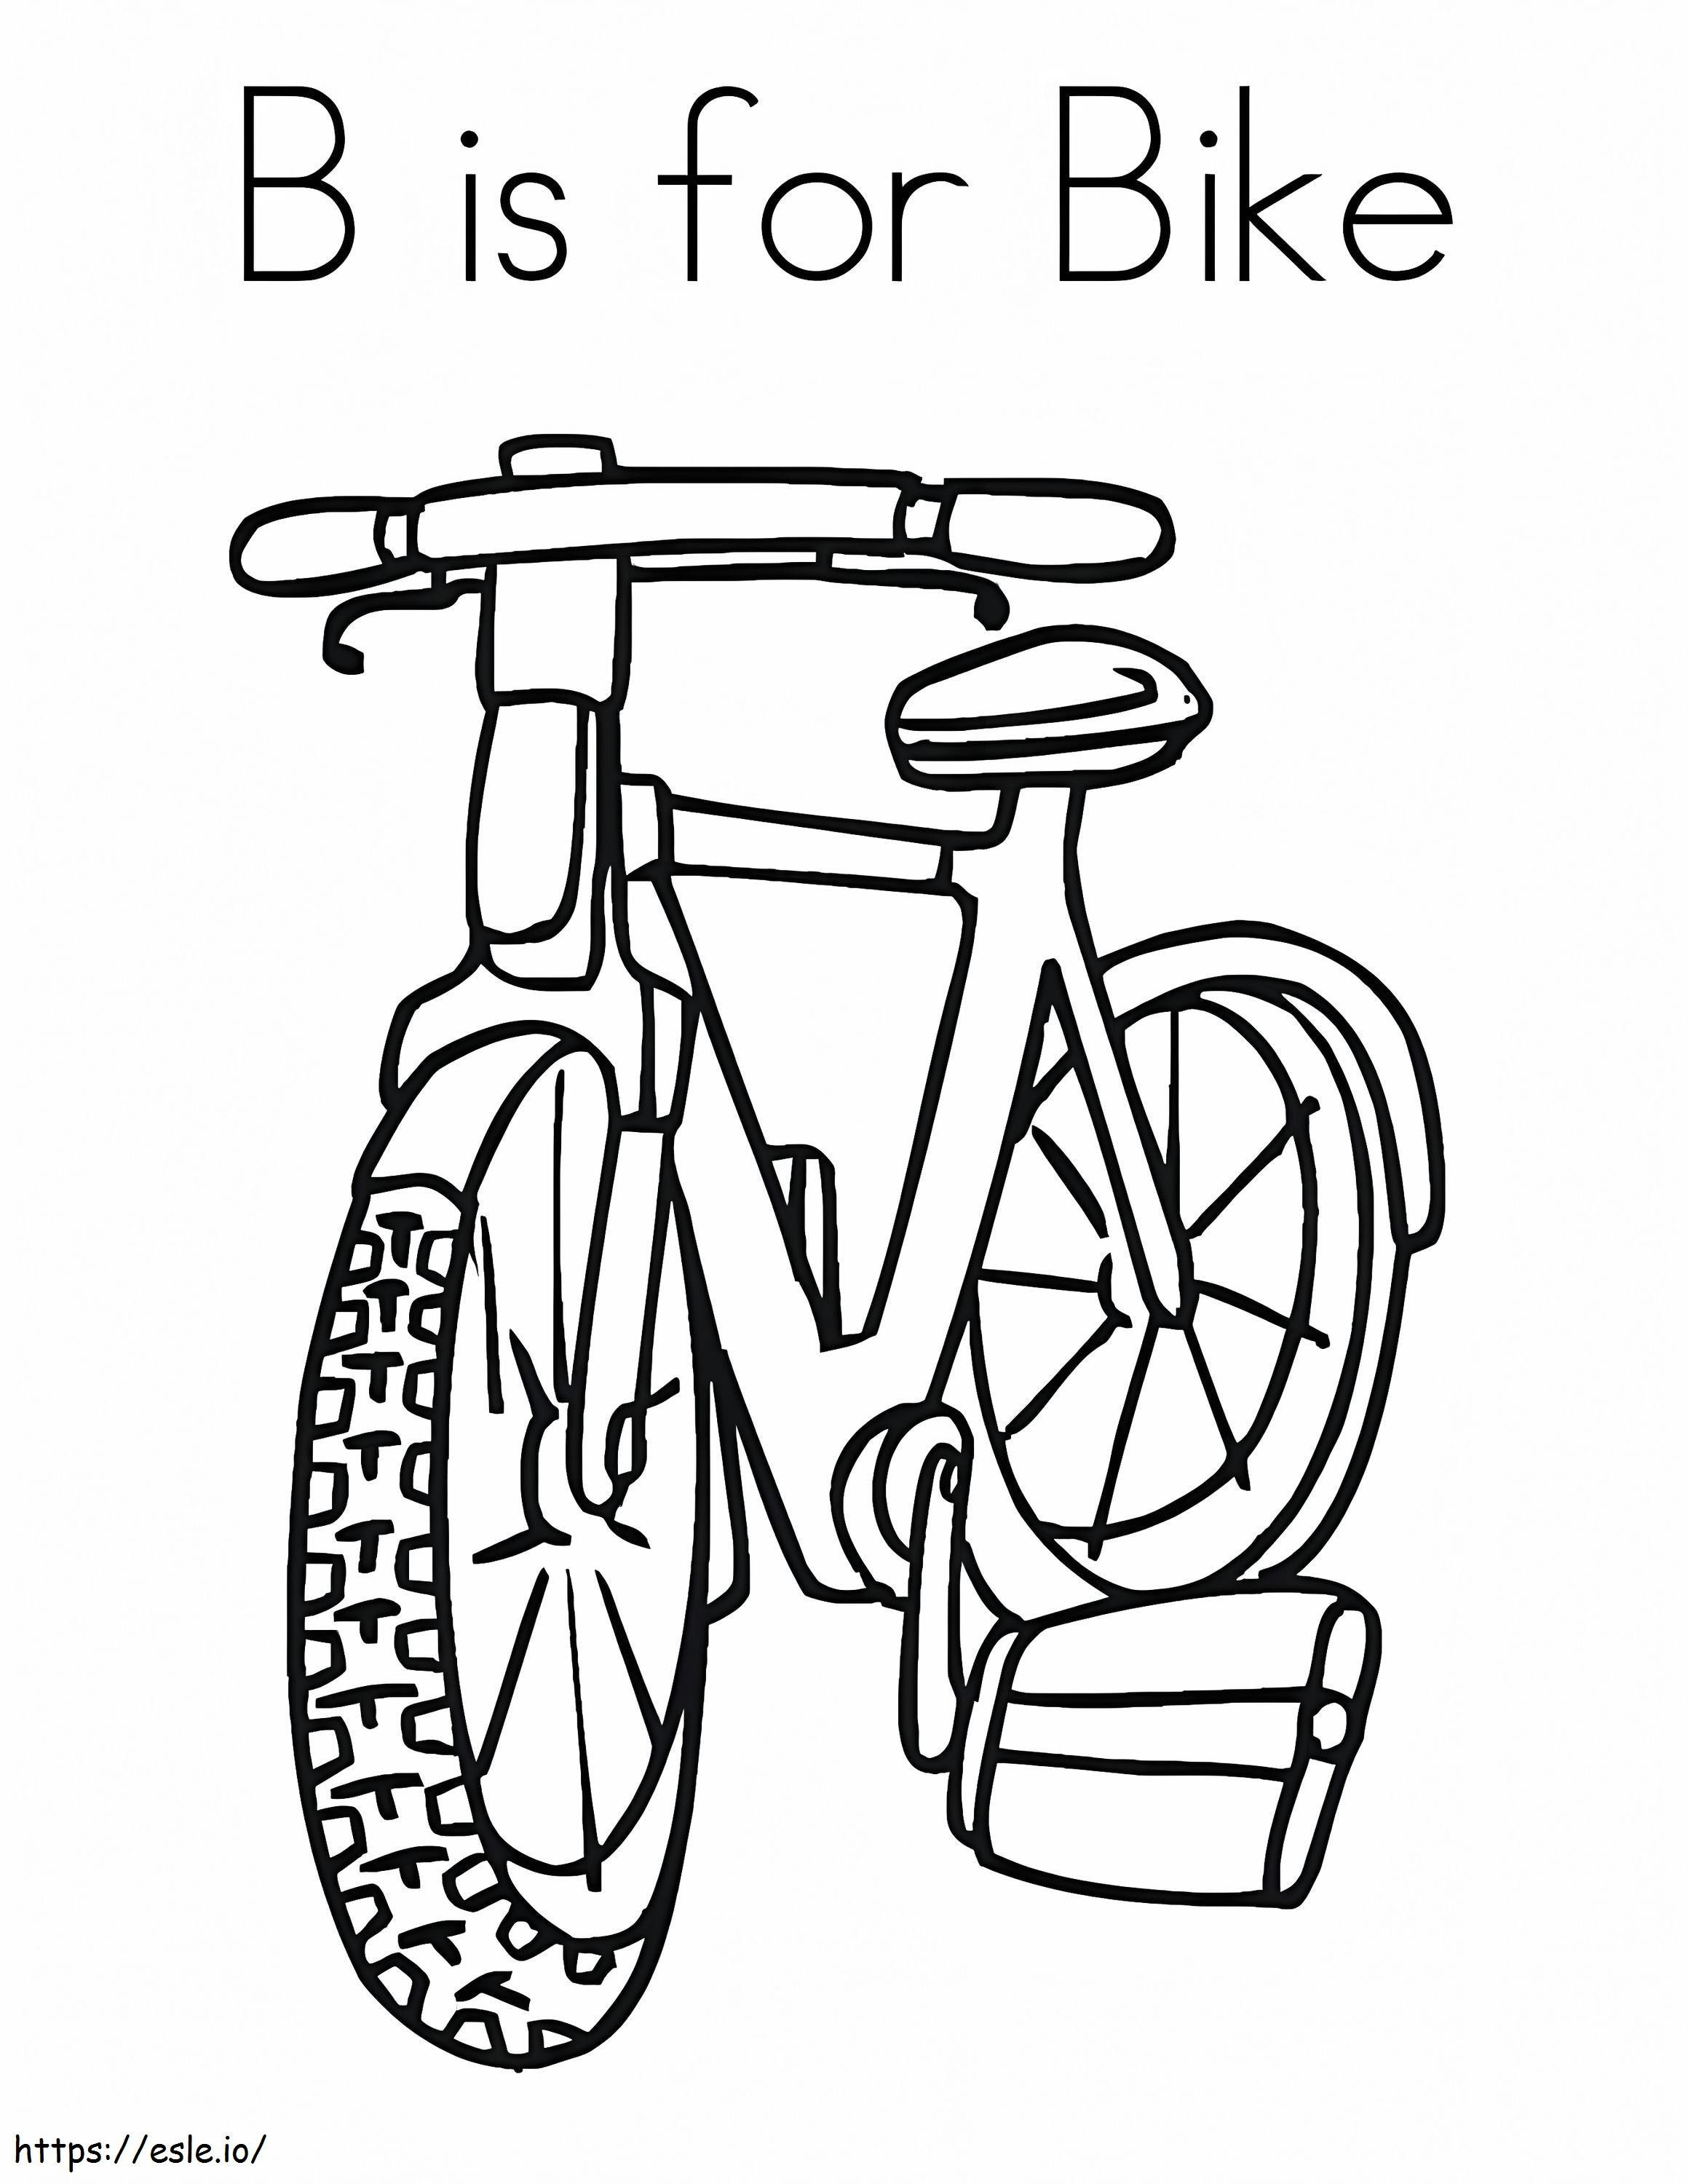 B Is For Bike coloring page